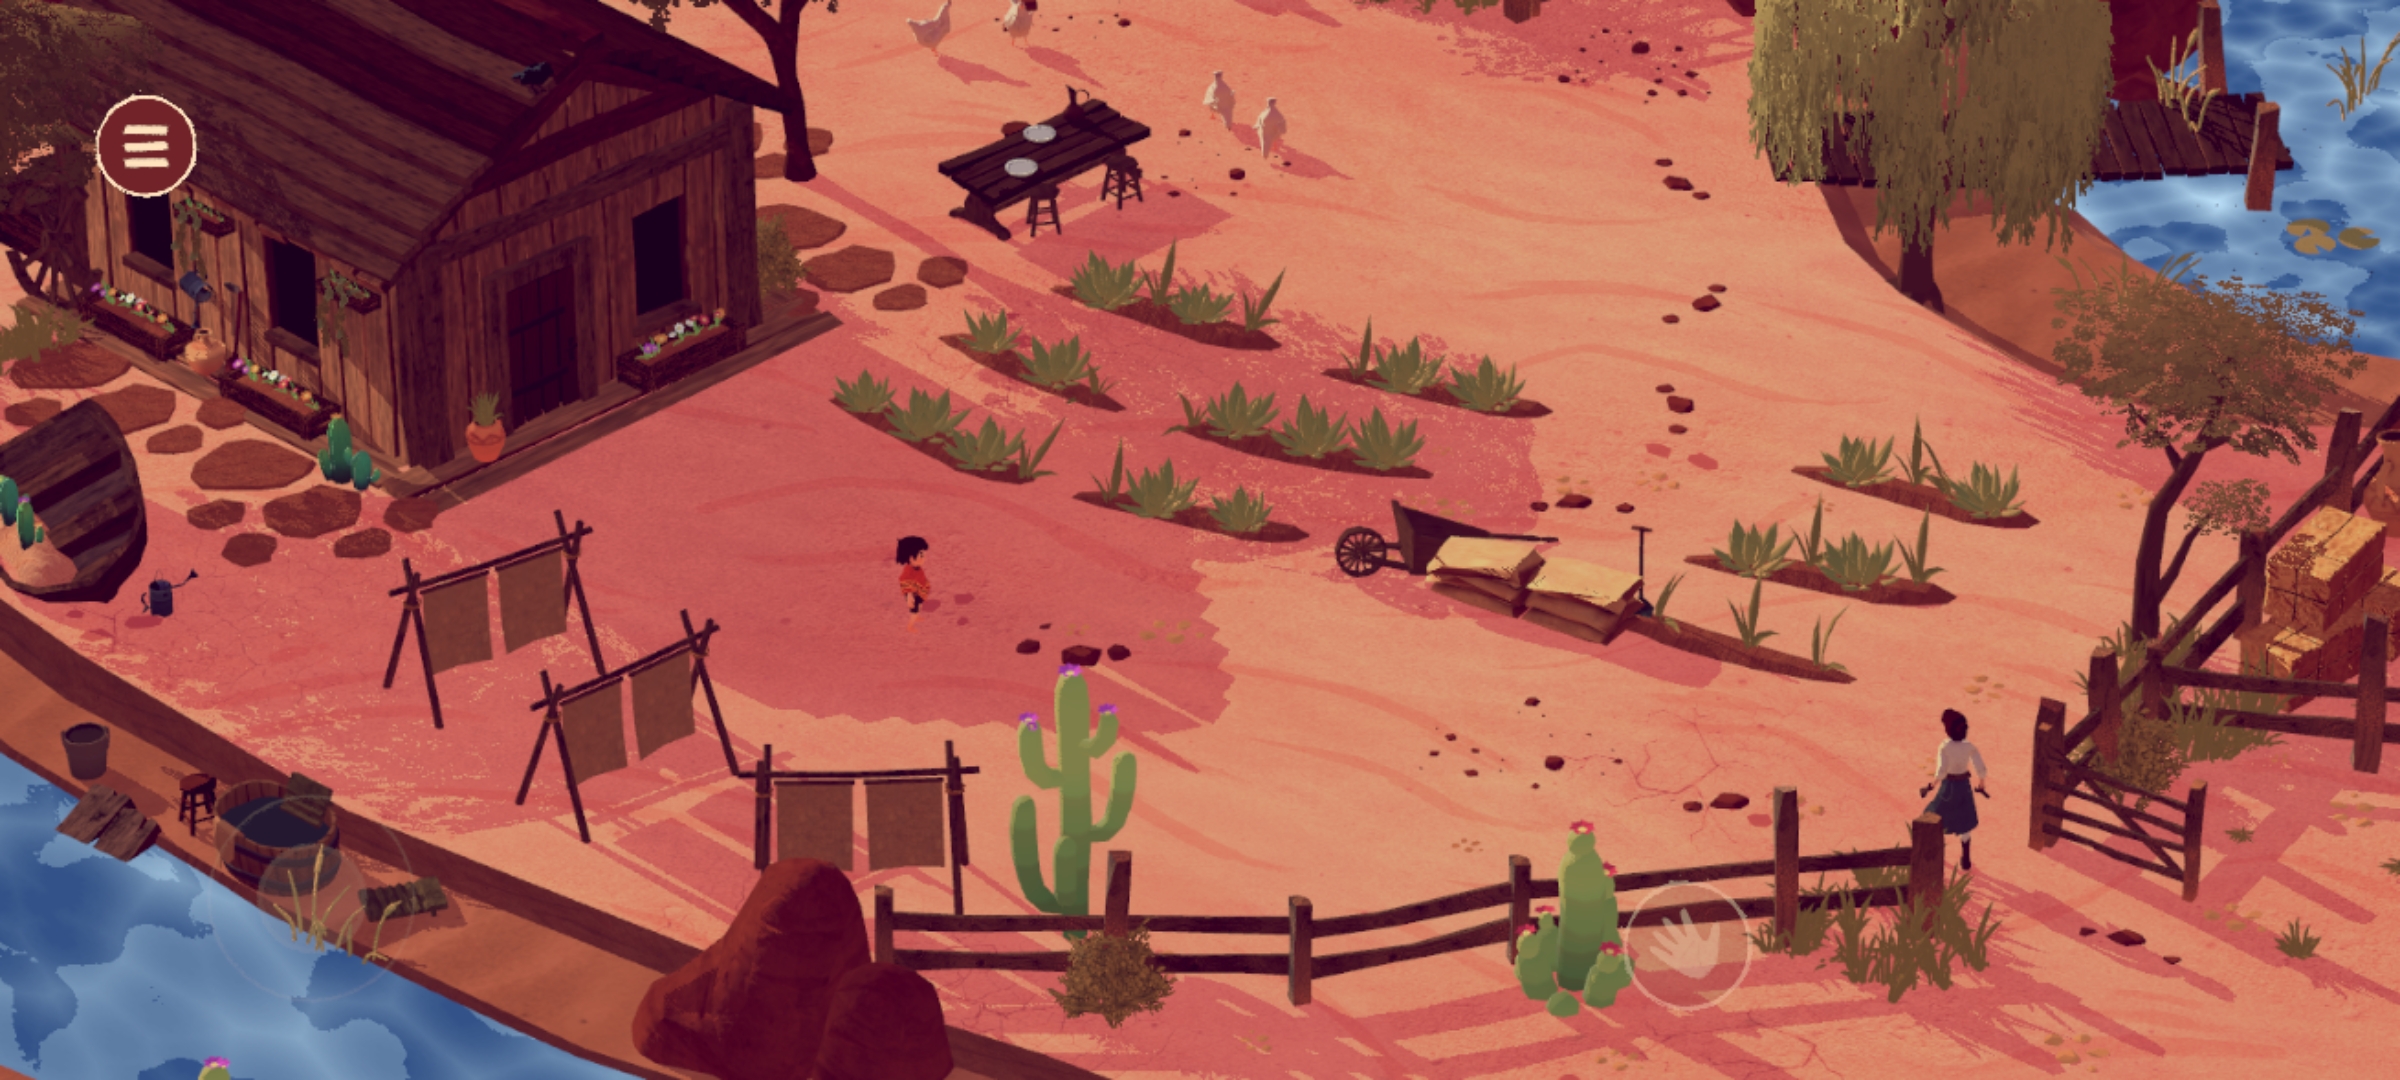 Game El Hijo A Wild West Tale Tiếng Việt Cho Android